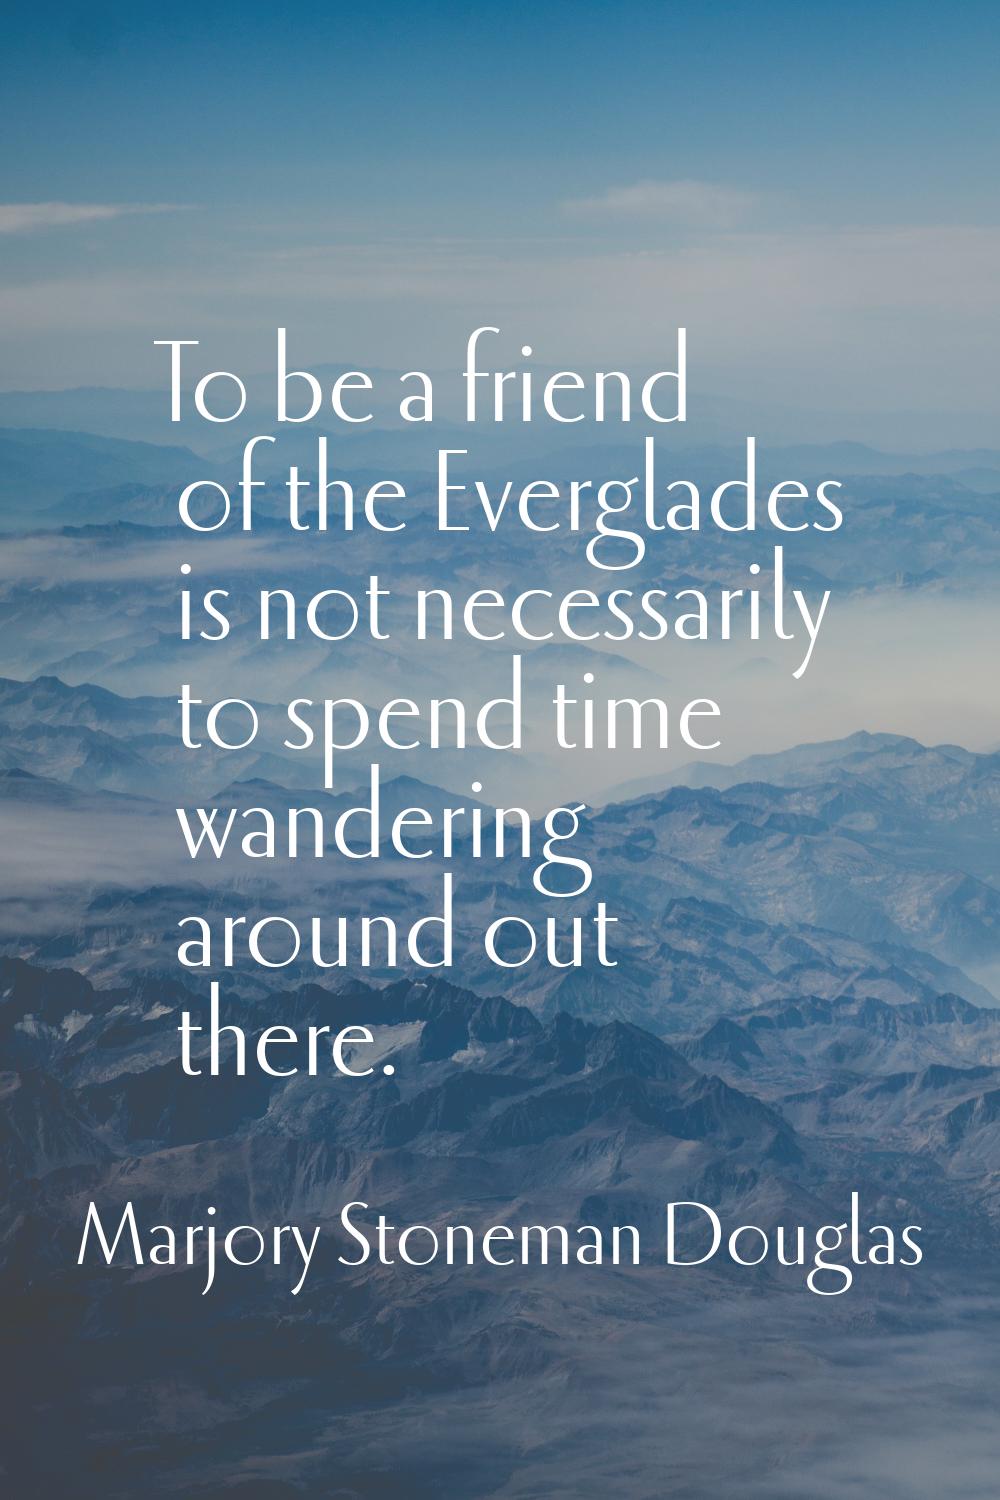 To be a friend of the Everglades is not necessarily to spend time wandering around out there.